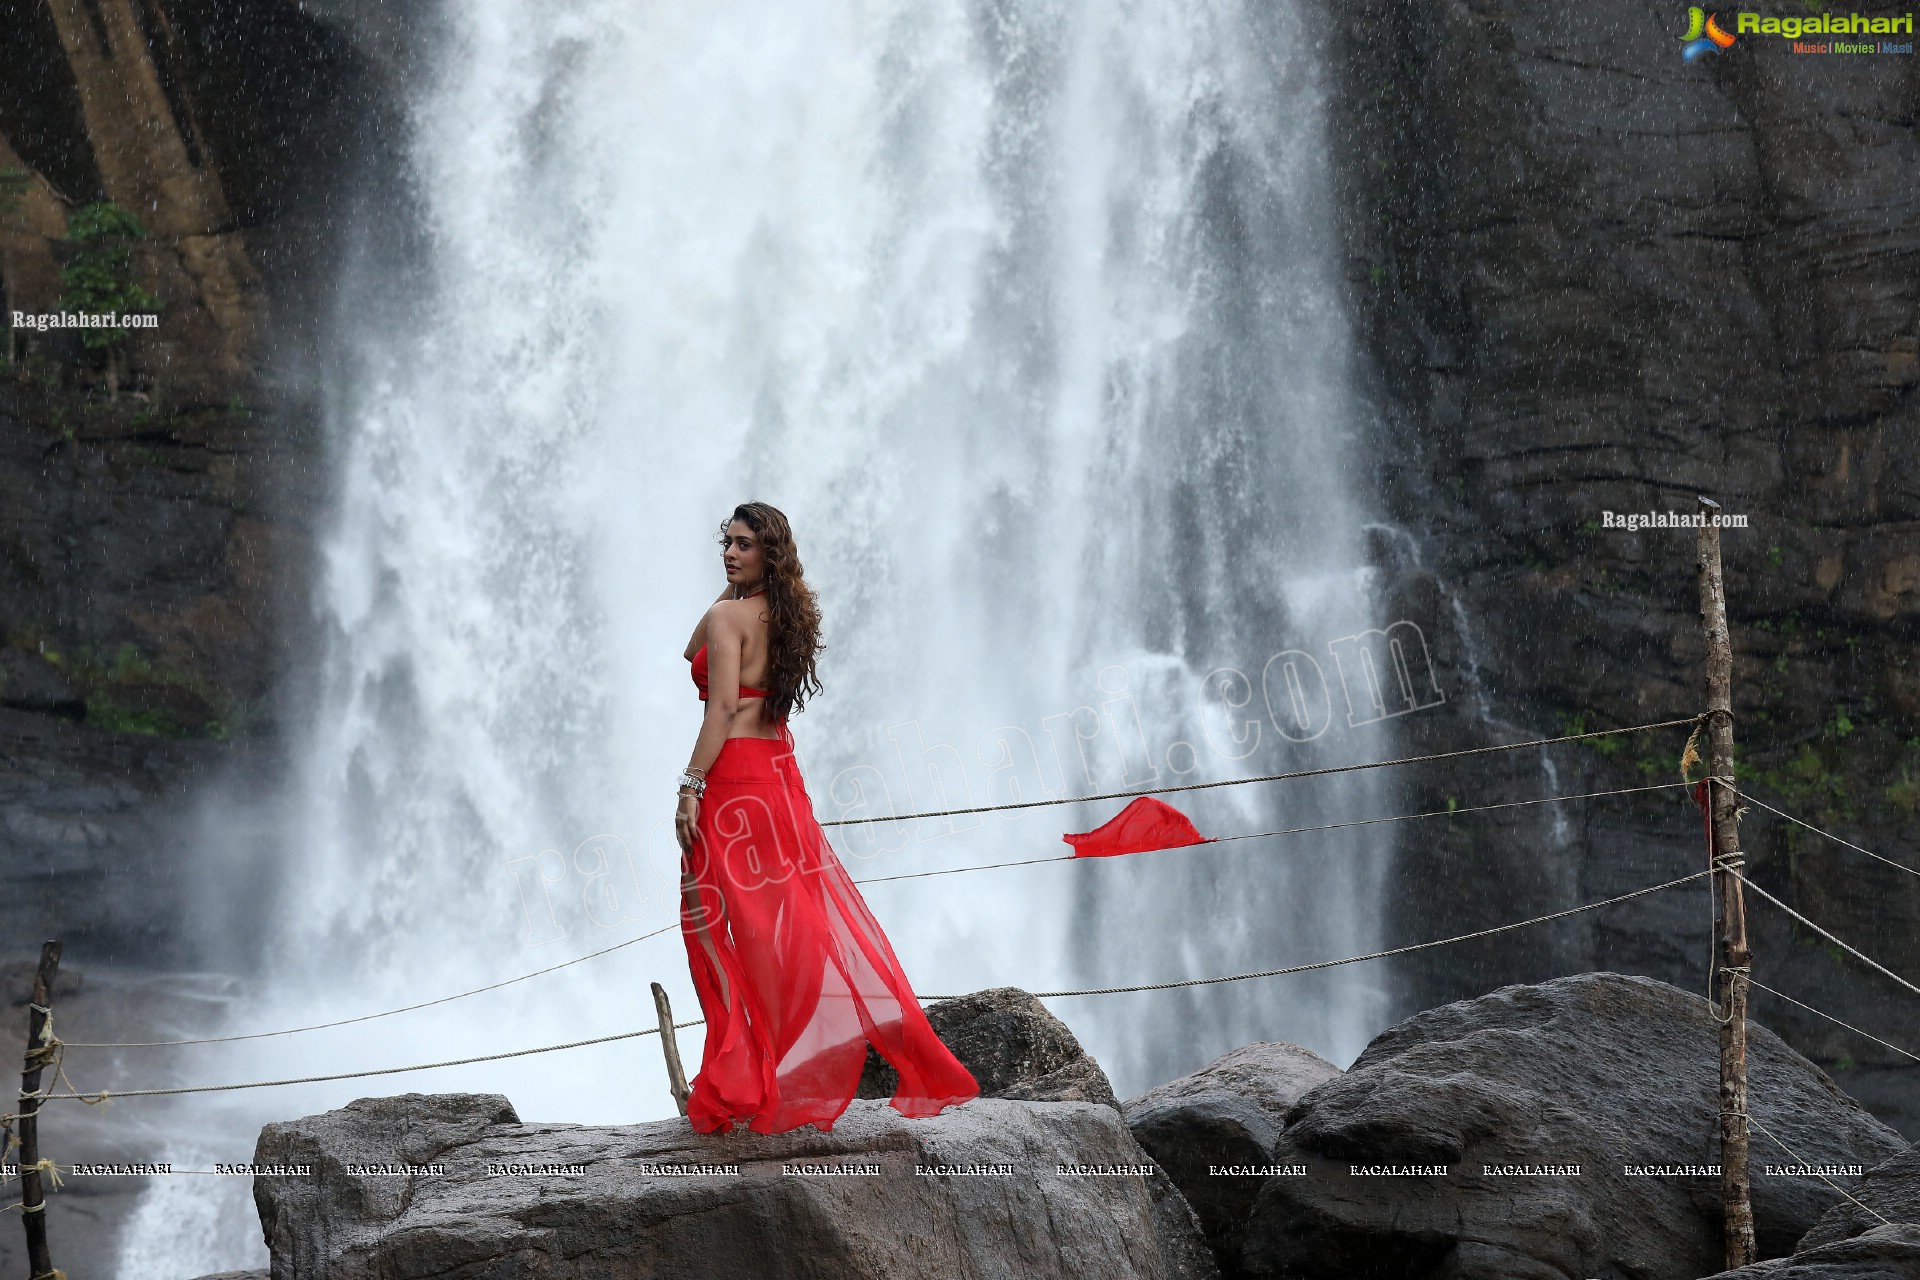 Payal Rajput Posing Provocatively in a Red Flowing Dress at a Waterfall, Exclusive